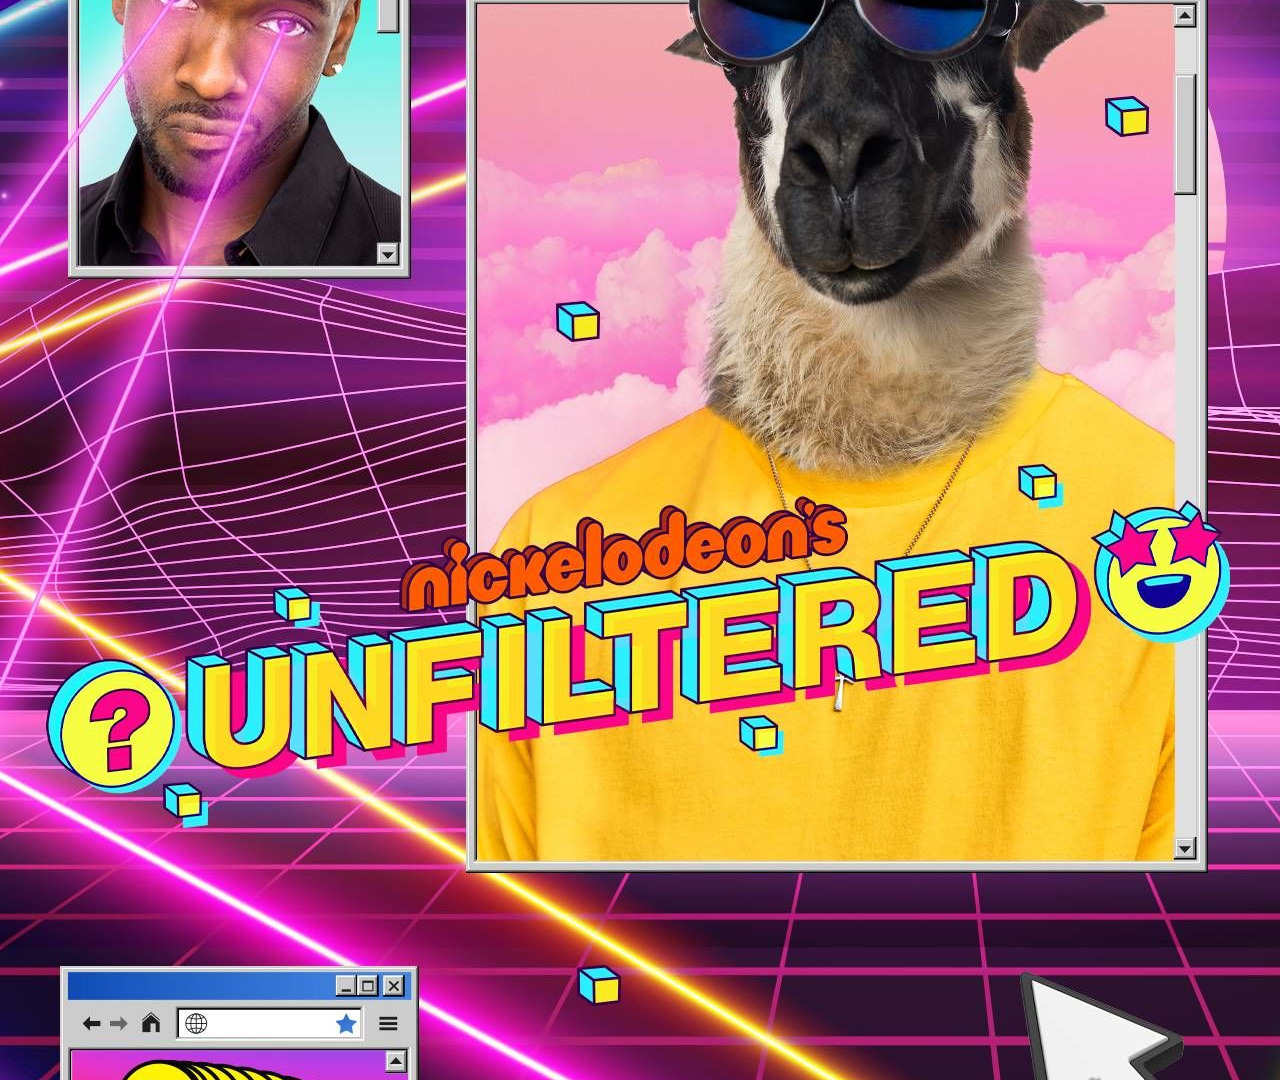 Show Nickelodeon's Unfiltered